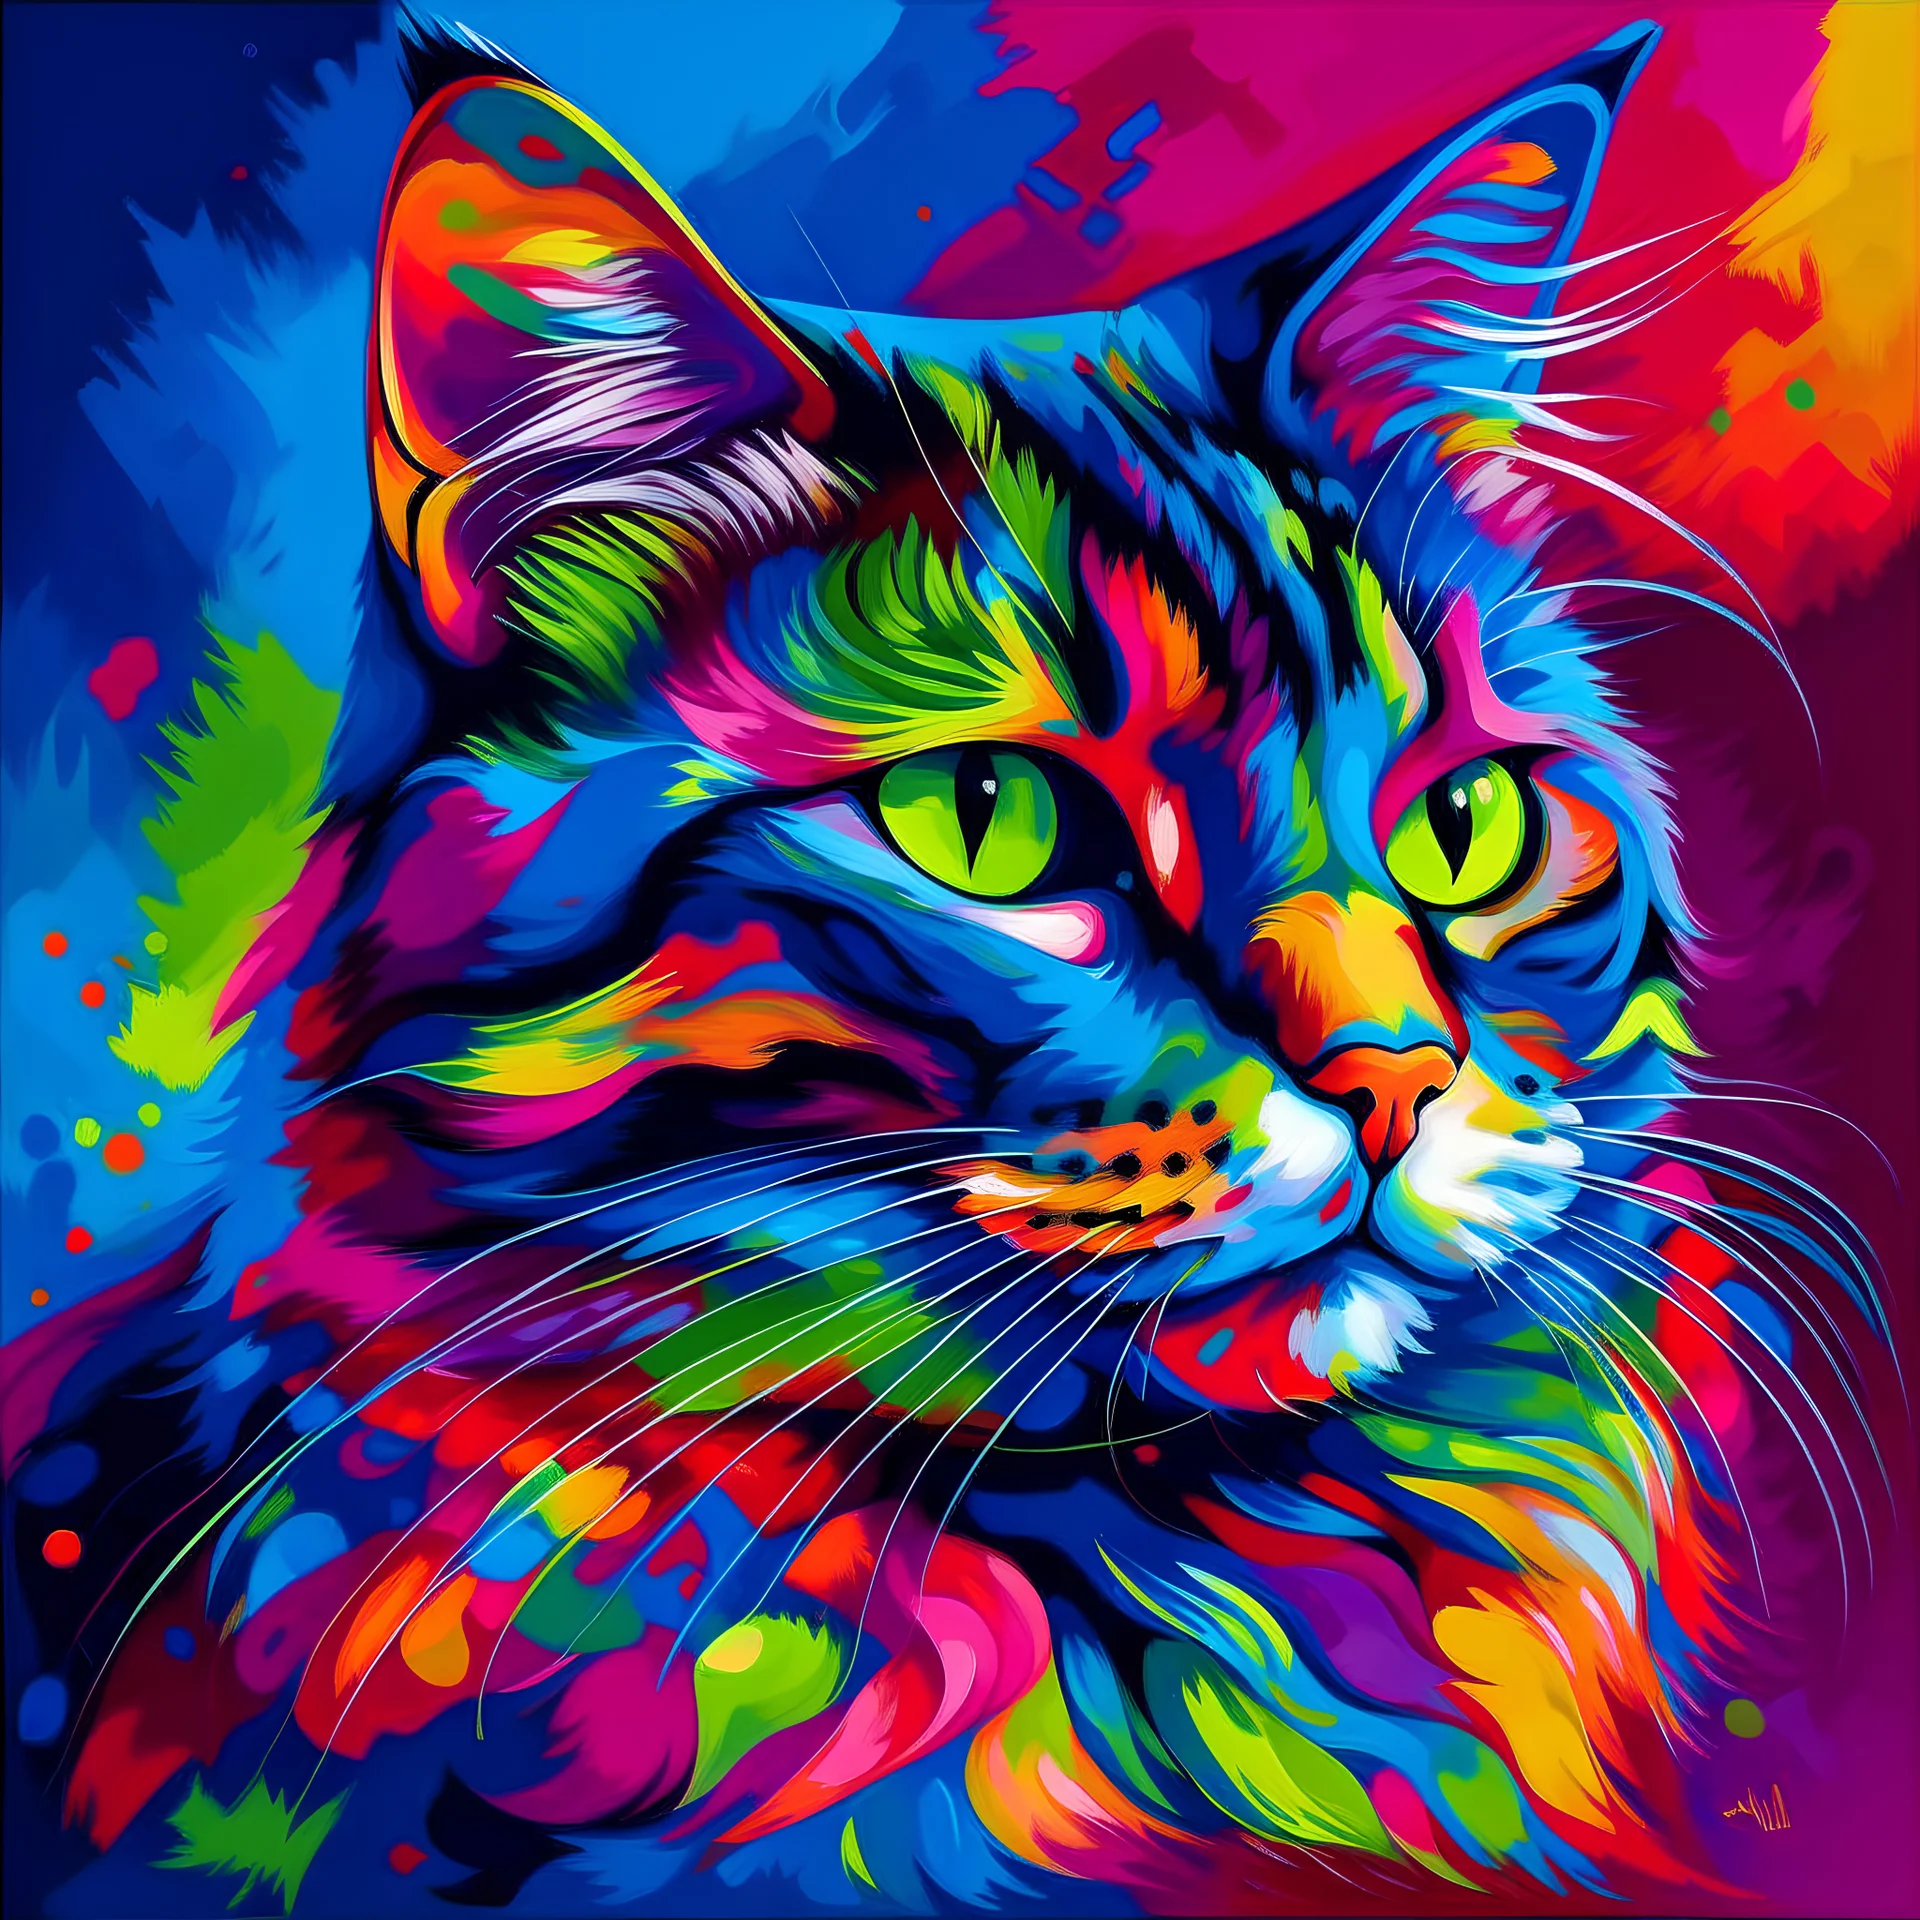 Generate a description of a whimsical "Colorful Cat" blending vibrant hues in its fur, reflecting a mesmerizing and unique appearance.